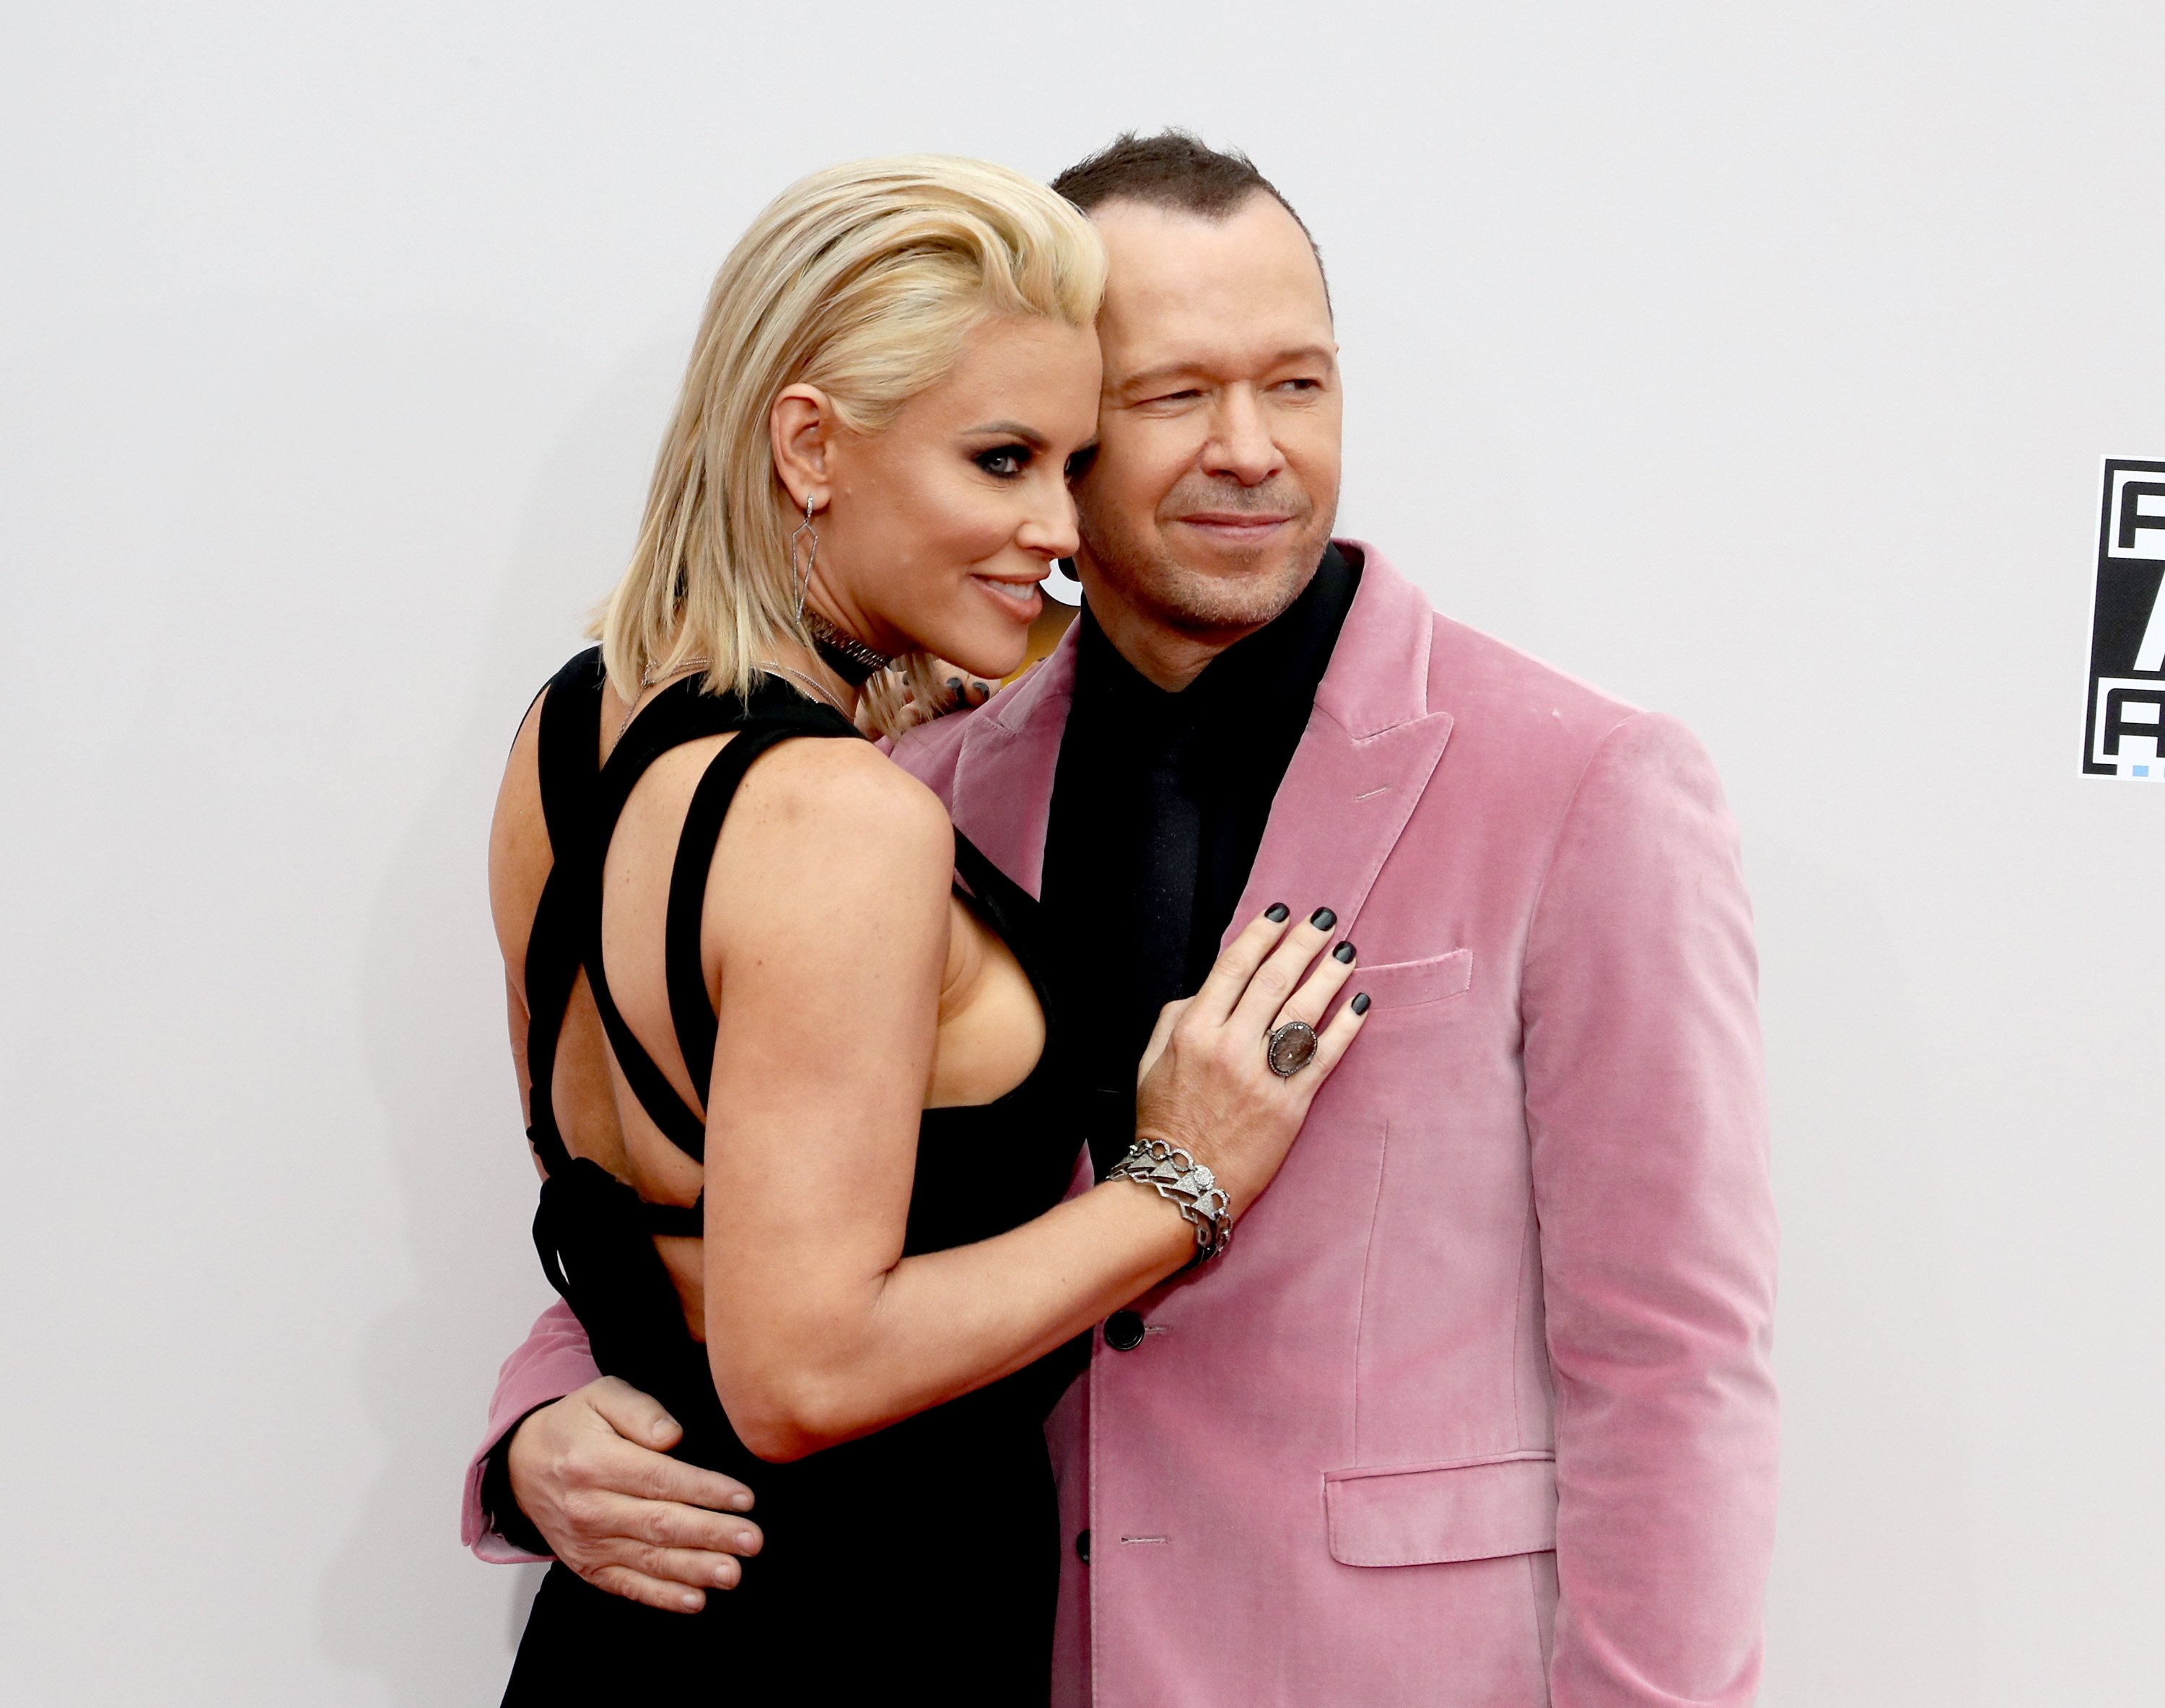 Jenny McCarthy and Donnie Wahlberg at the 2016 American Music Awards on November 20, 2016, in Los Angeles, California. | Source: Getty Images